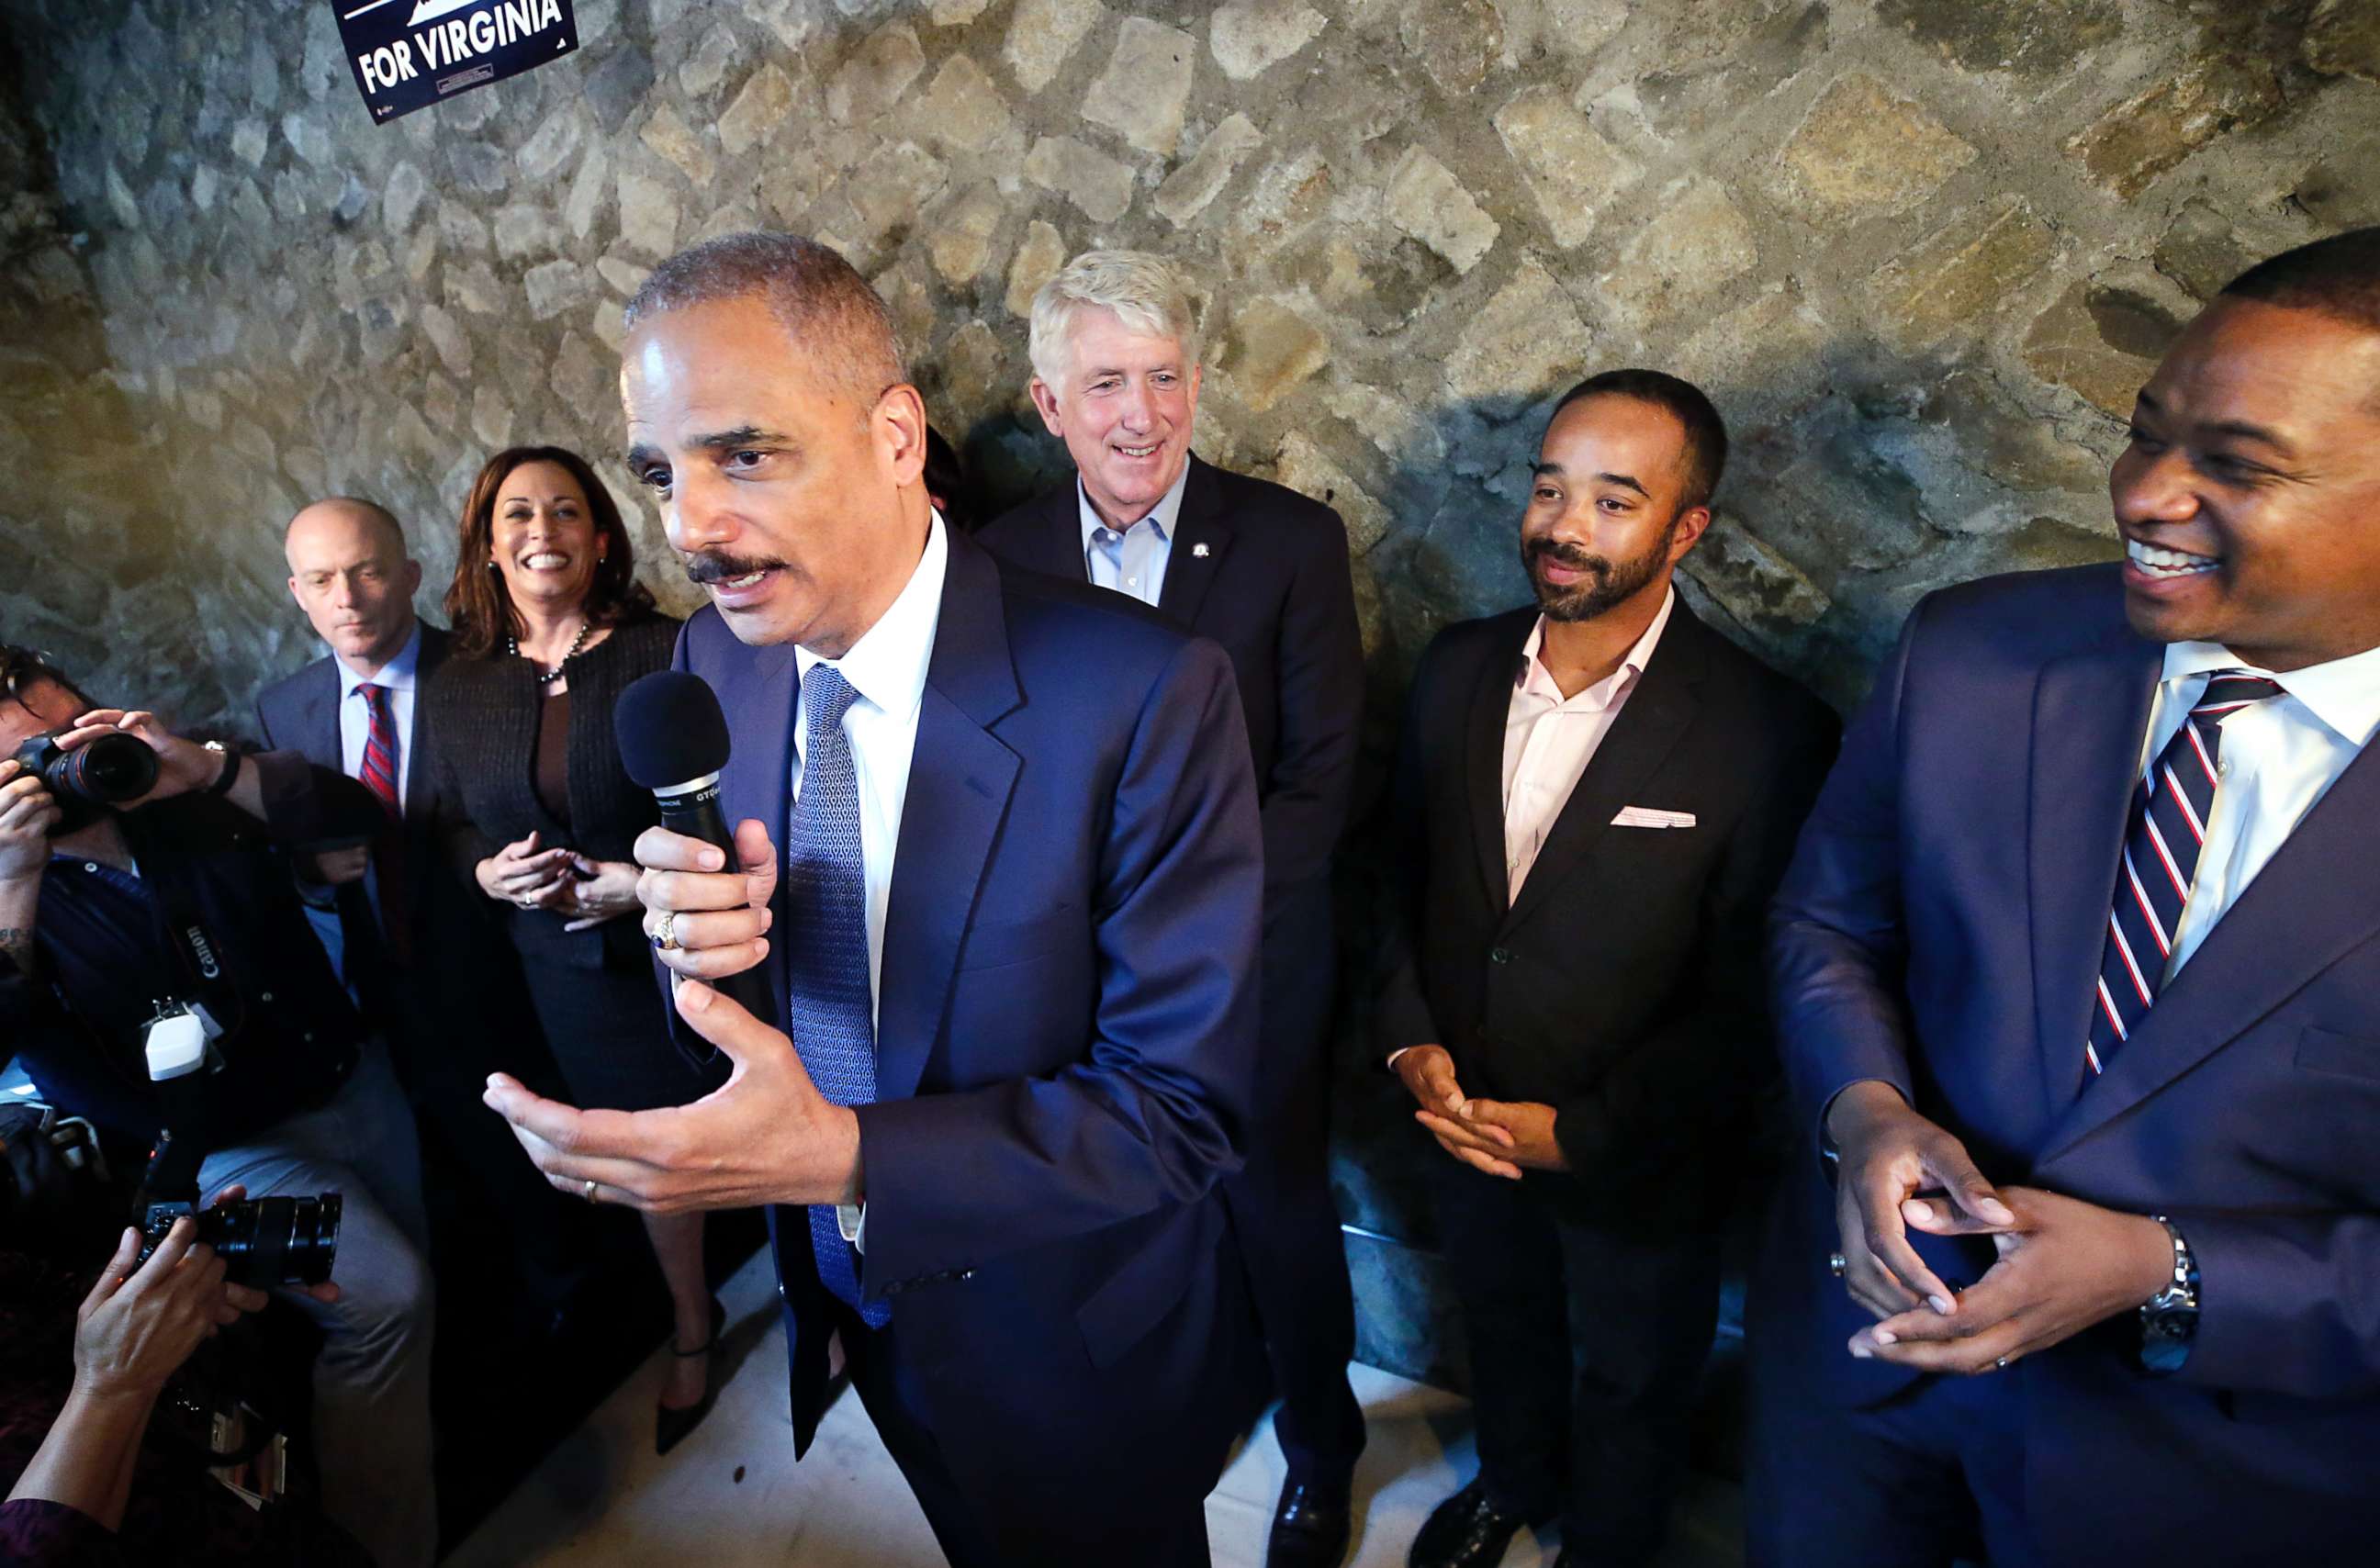 PHOTO: Former Attorney General Eric Holder, center, speaks during a get-out-the-vote event at Blue Bee Cider in Richmond, Va., Oct. 29, 2017.